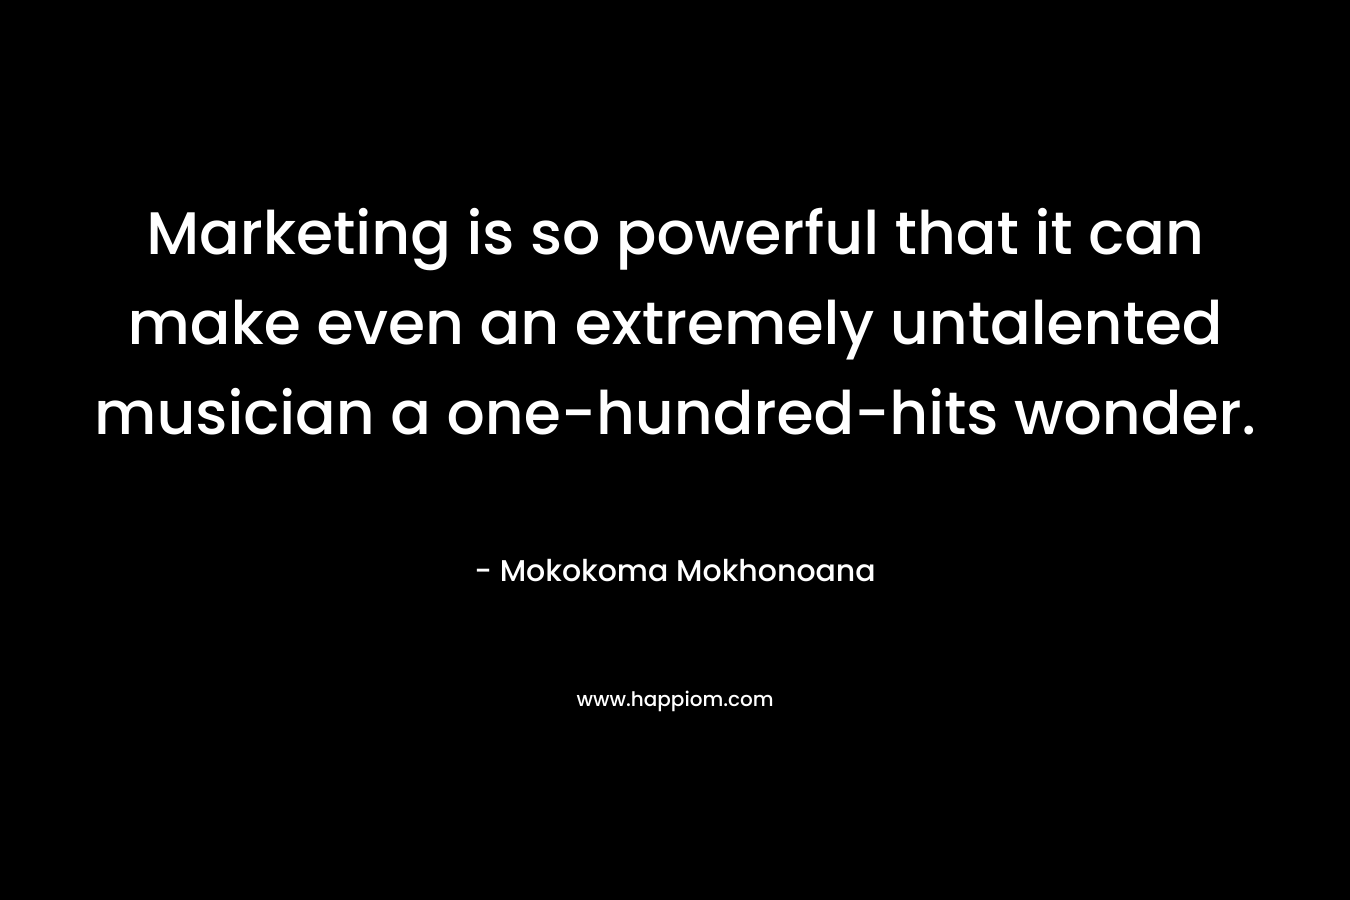 Marketing is so powerful that it can make even an extremely untalented musician a one-hundred-hits wonder.